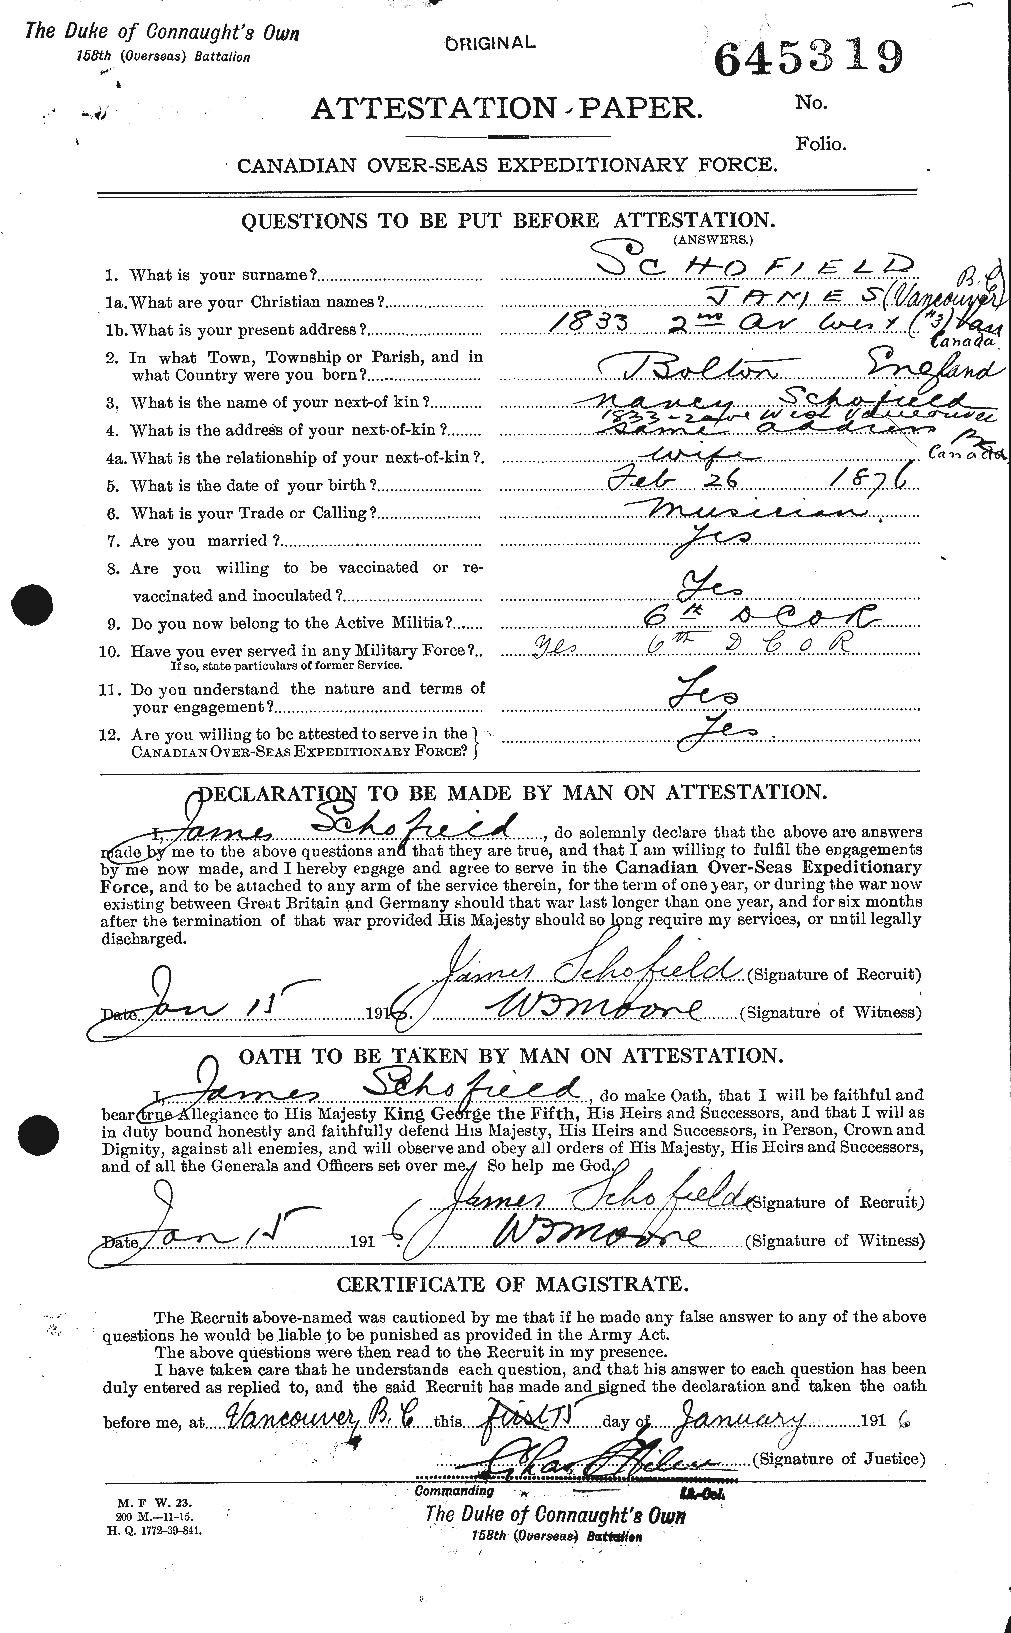 Personnel Records of the First World War - CEF 081089a